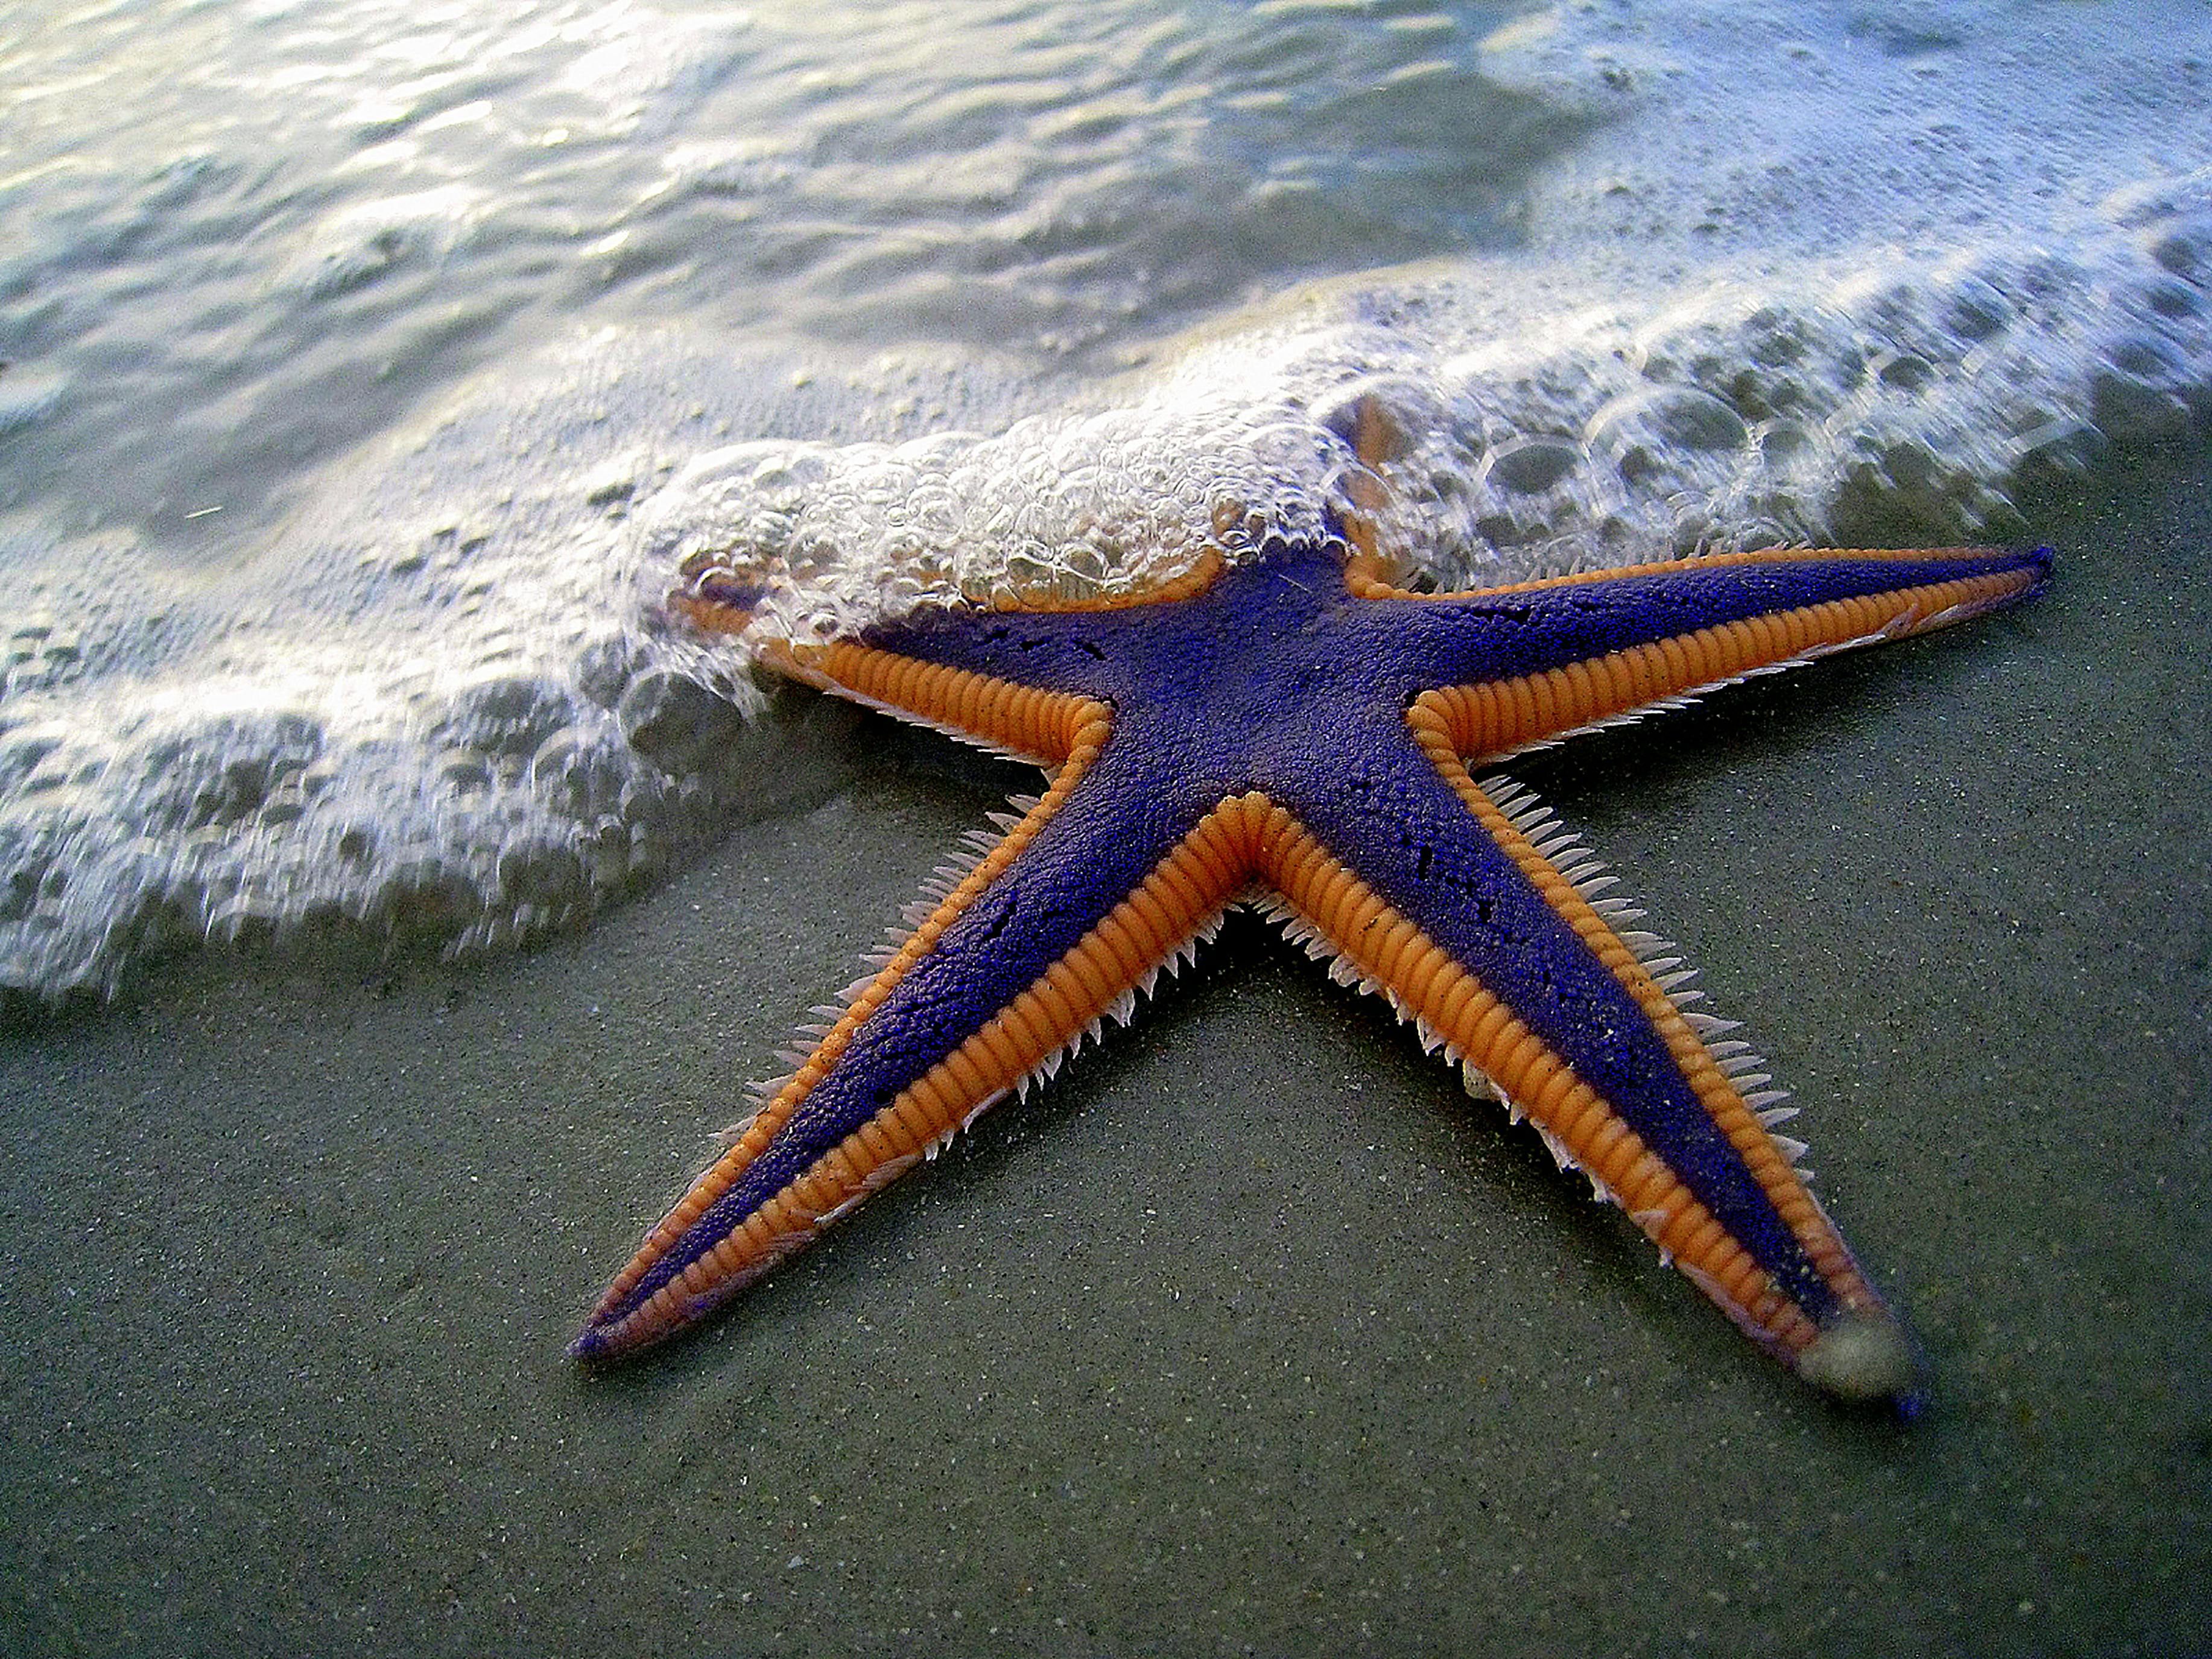 Download Starfish wallpapers for mobile phone free Starfish HD pictures